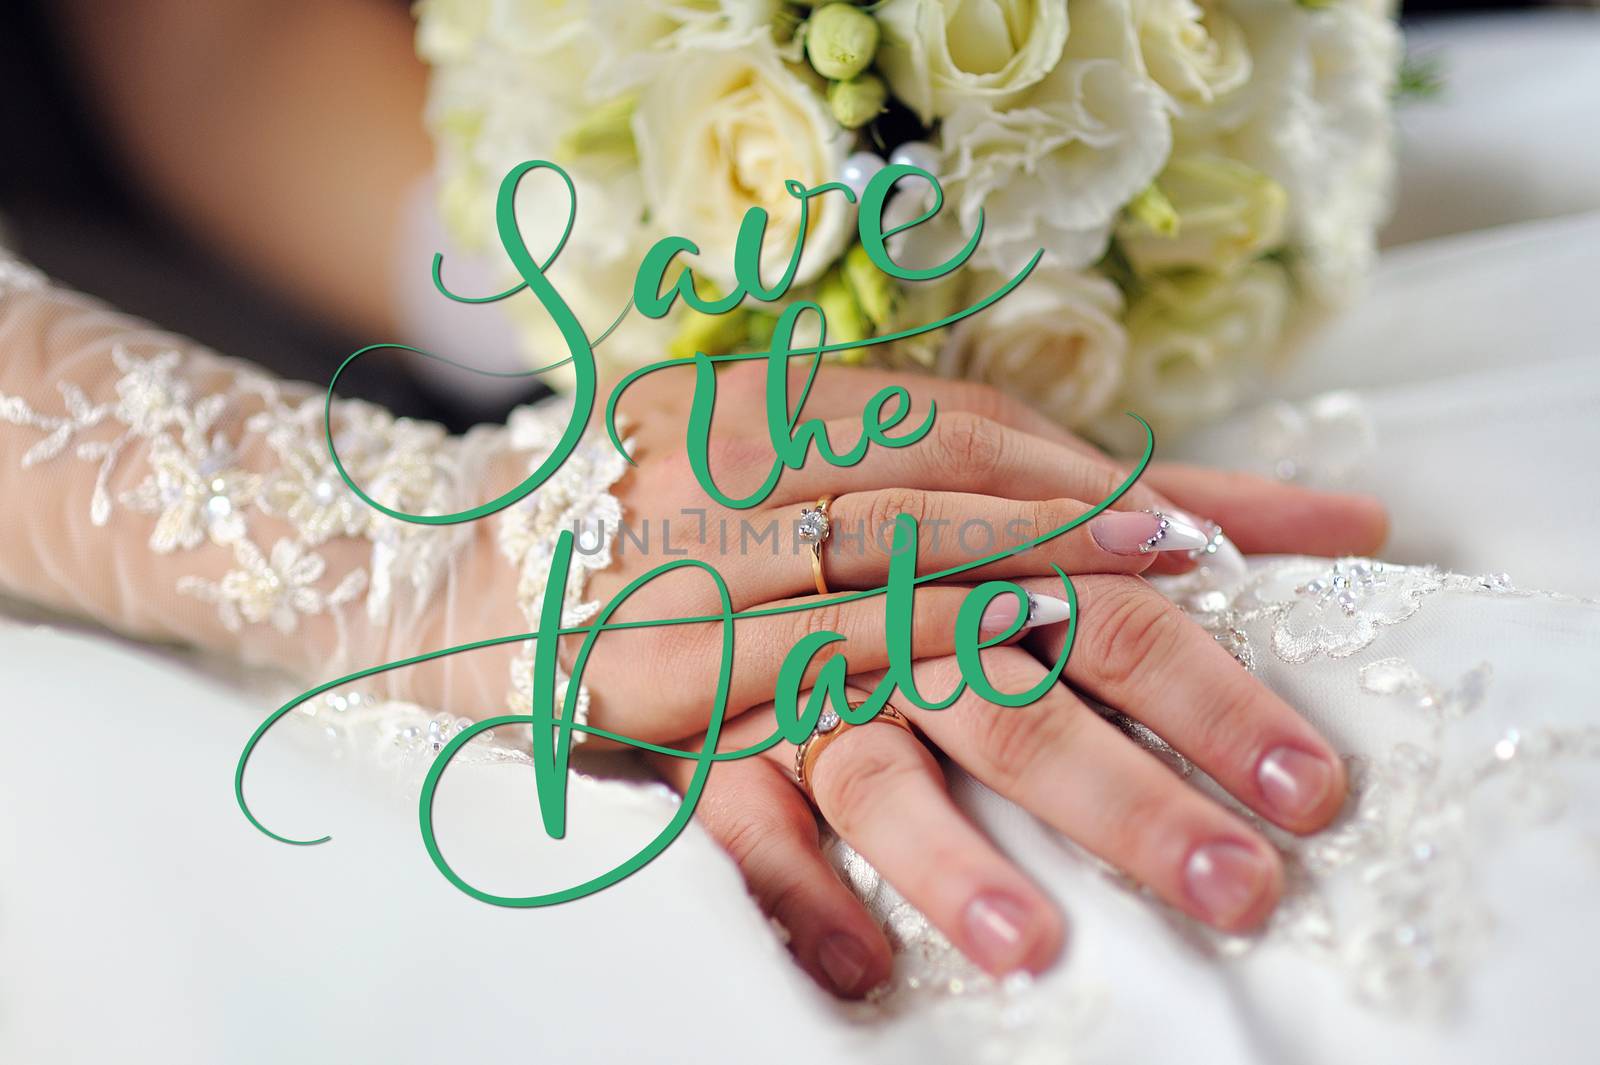 Wedding Flowers Bouquet in Bride Hands with White Dress on Background. words Save the Date. Calligraphy lettering